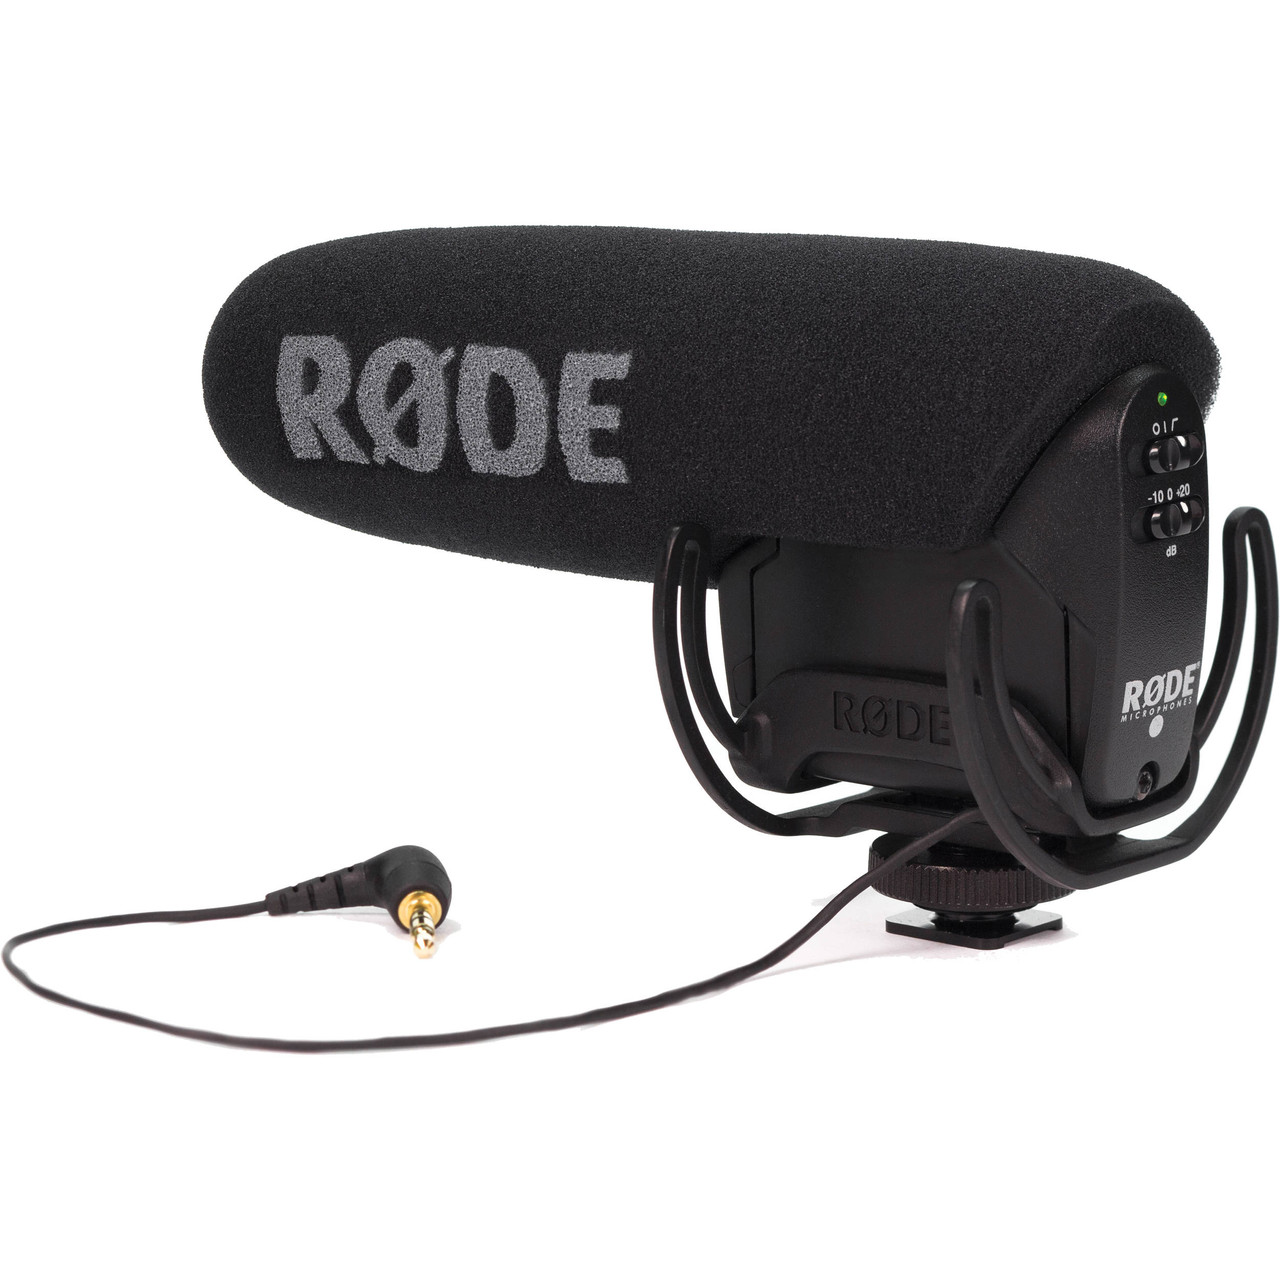 RODE VideoMicro Ultracompact Camera-Mount Shotgun Microphone with GoPro Pro  3.5mm Mic Adapter